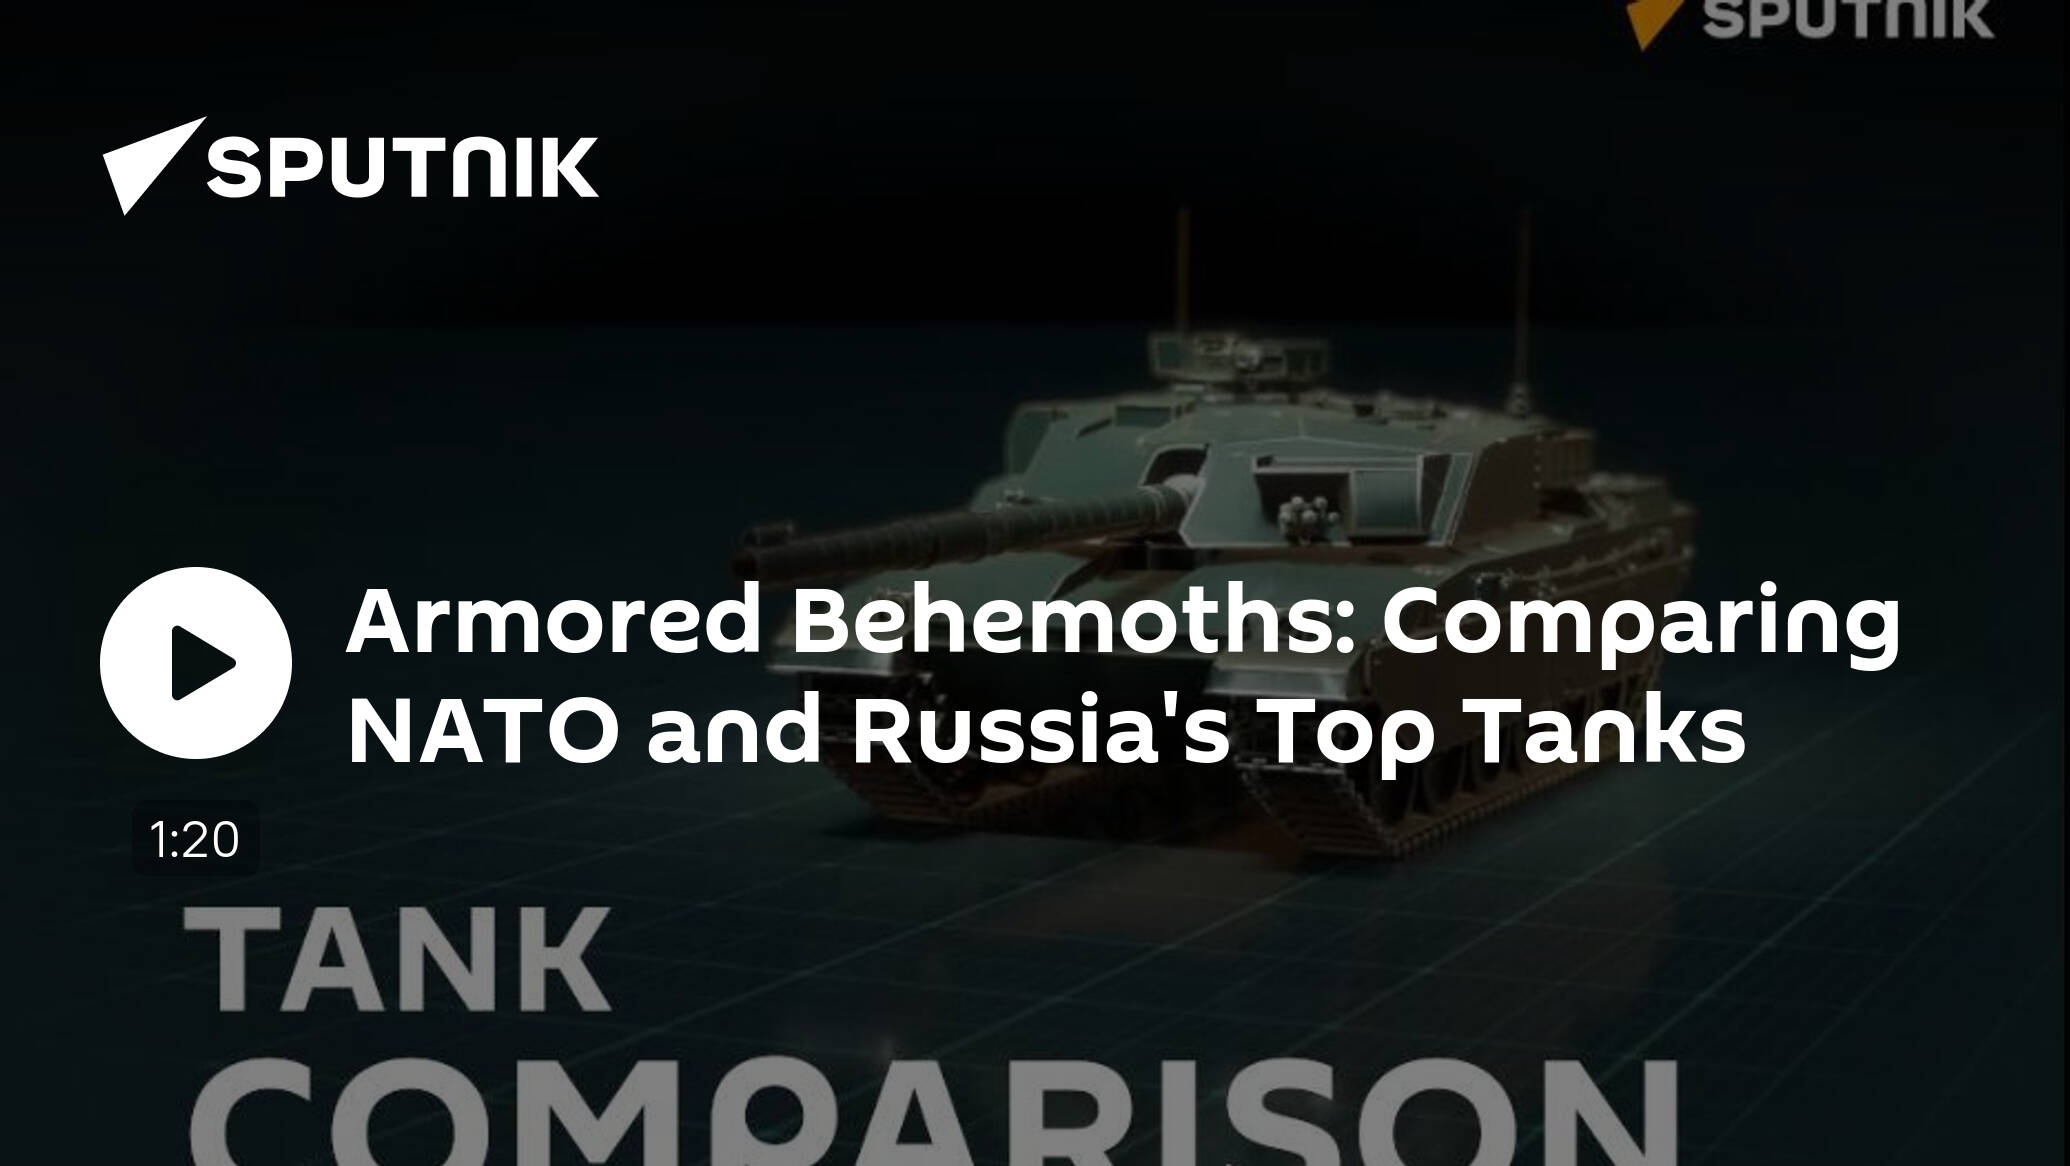 Armored Behemoths: Comparing NATO and Russia's Top Tanks